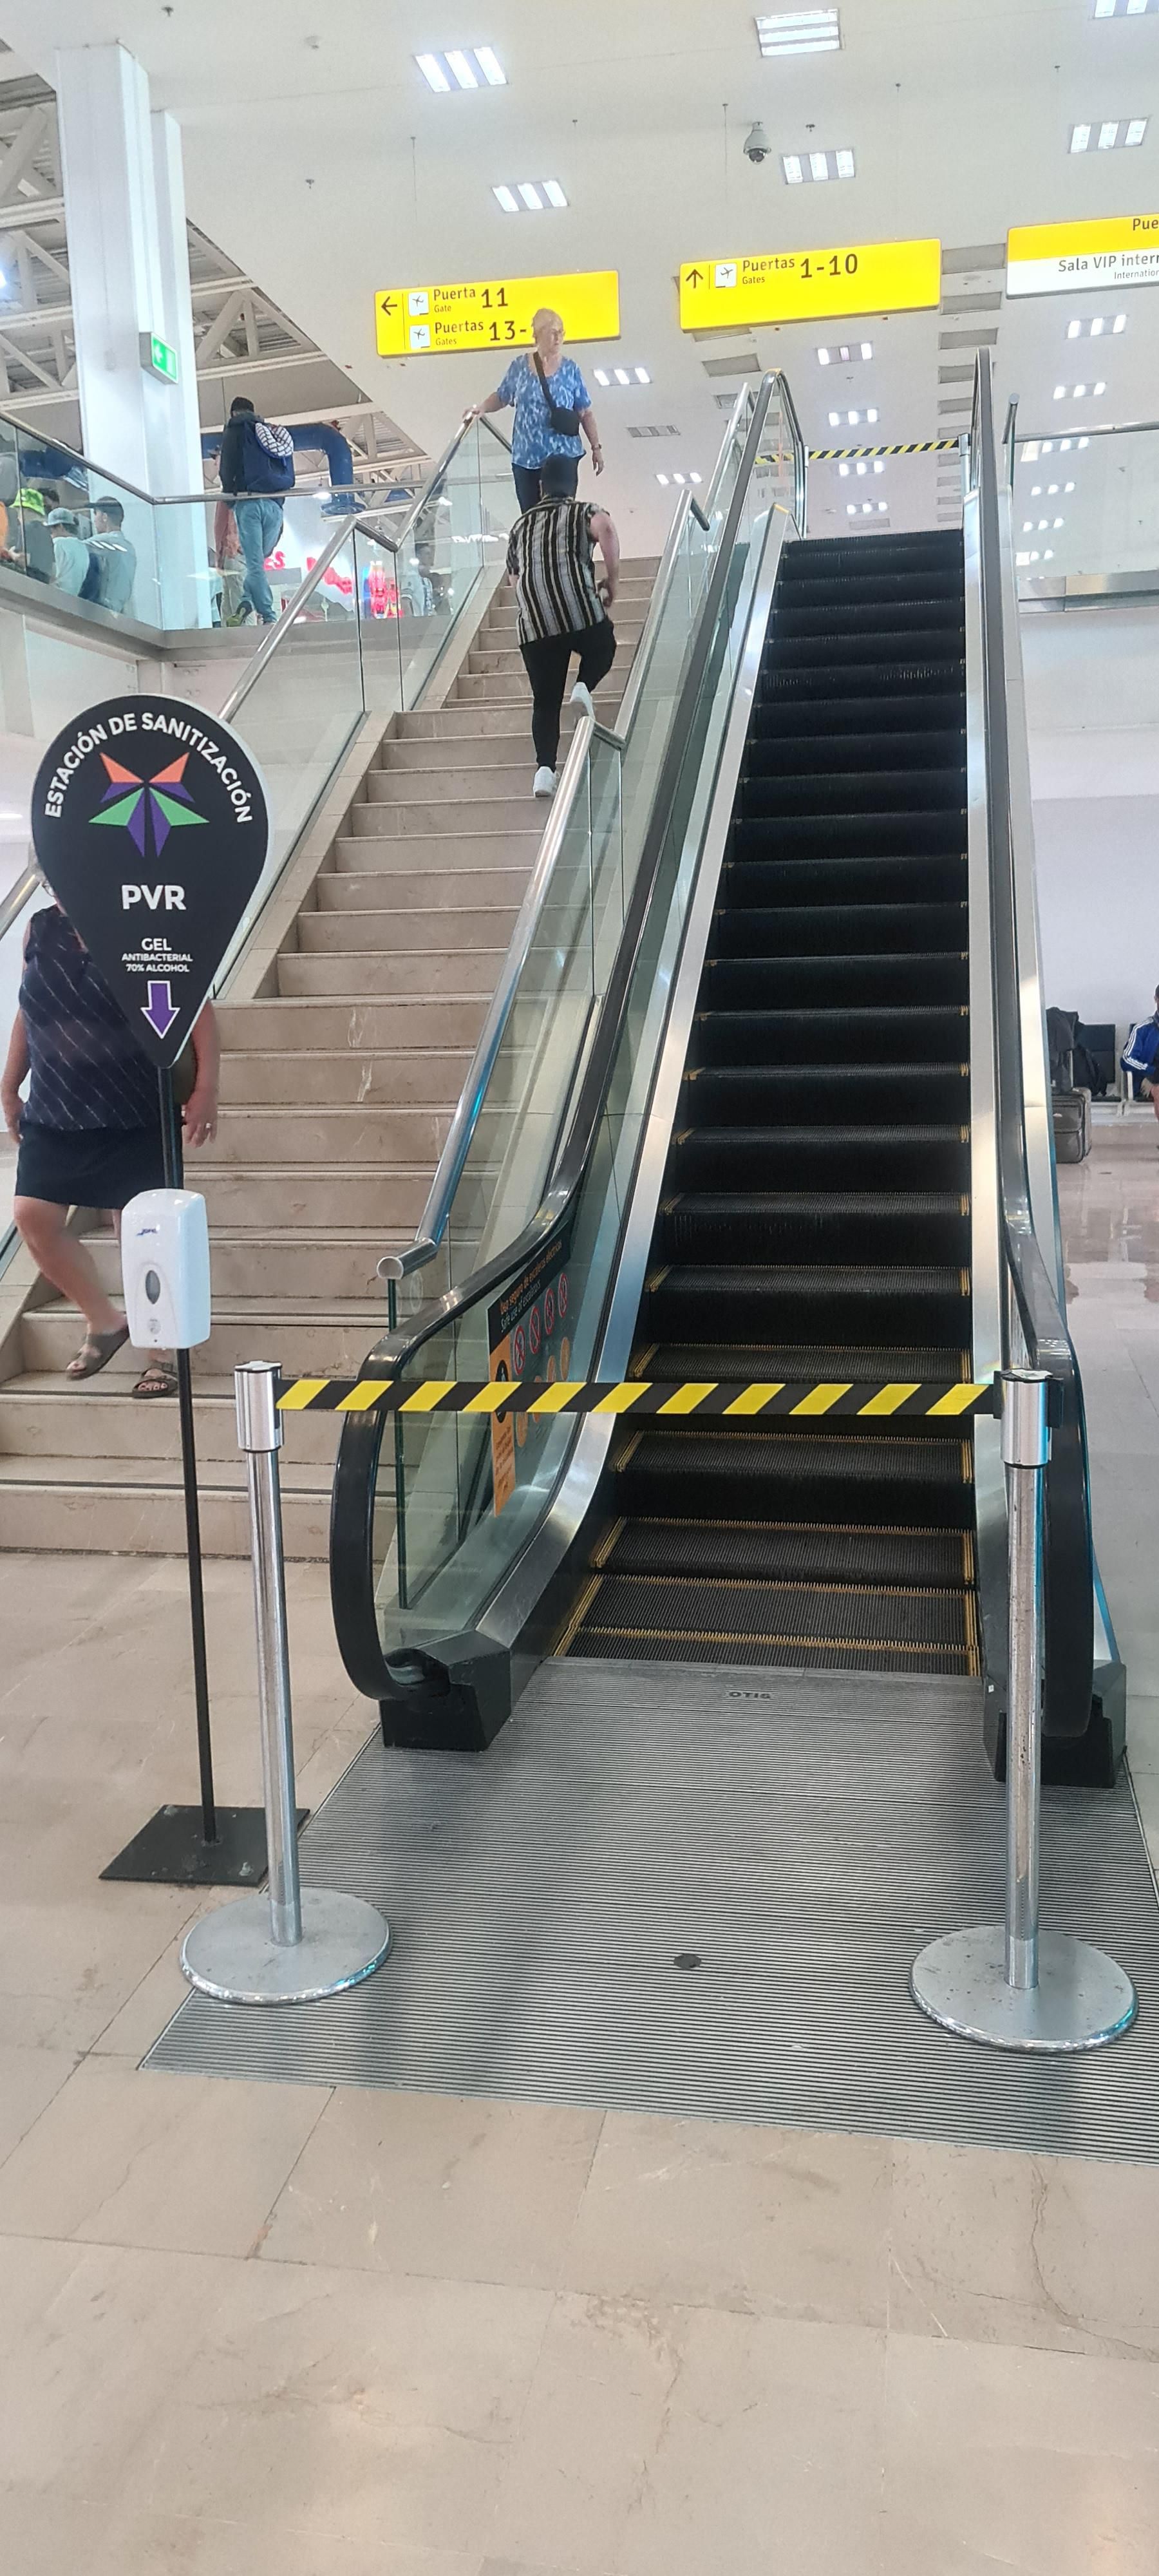 Mitch Hedberg would roll over in his grave.